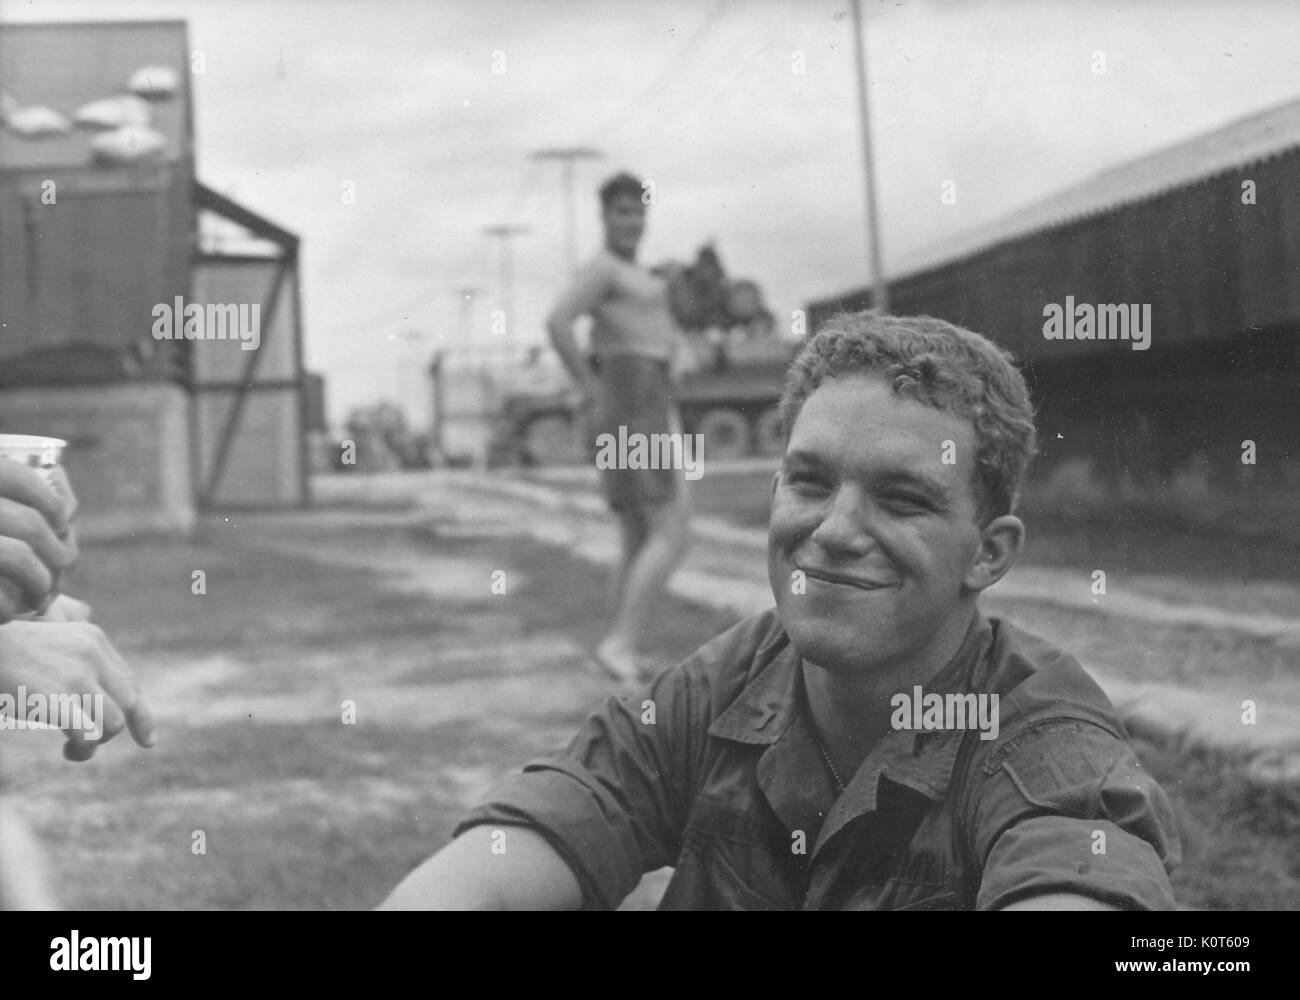 A United States Army soldier smiling while he is sitting on the ground, another soldier wearing only a towel in the background is trying to get the attention of the photographer by striking the pose of a pin-up girl, Vietnam, 1967. Stock Photo